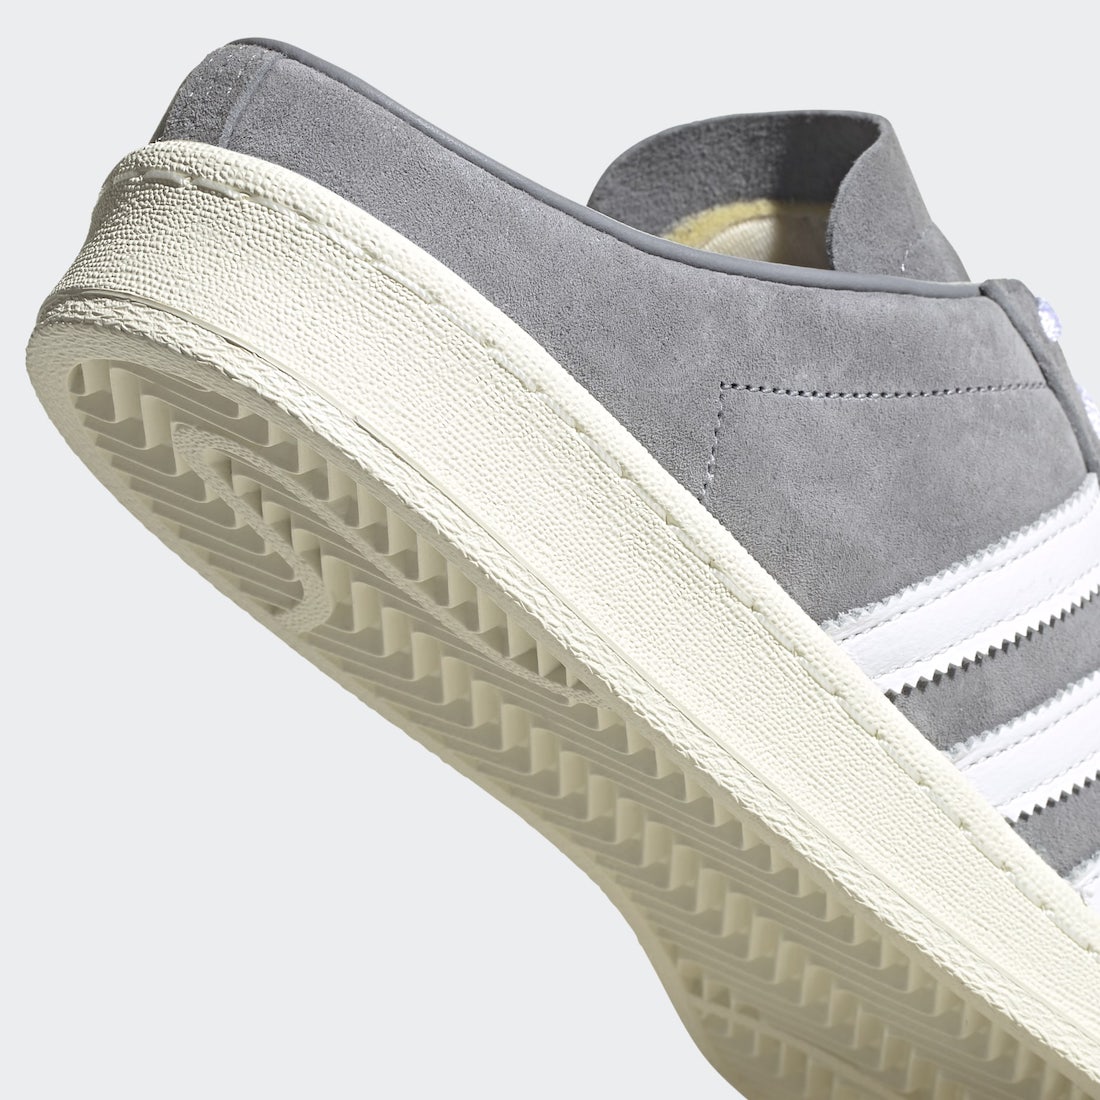 adidas Campus 80s Mules Grey FX5841 Release Date